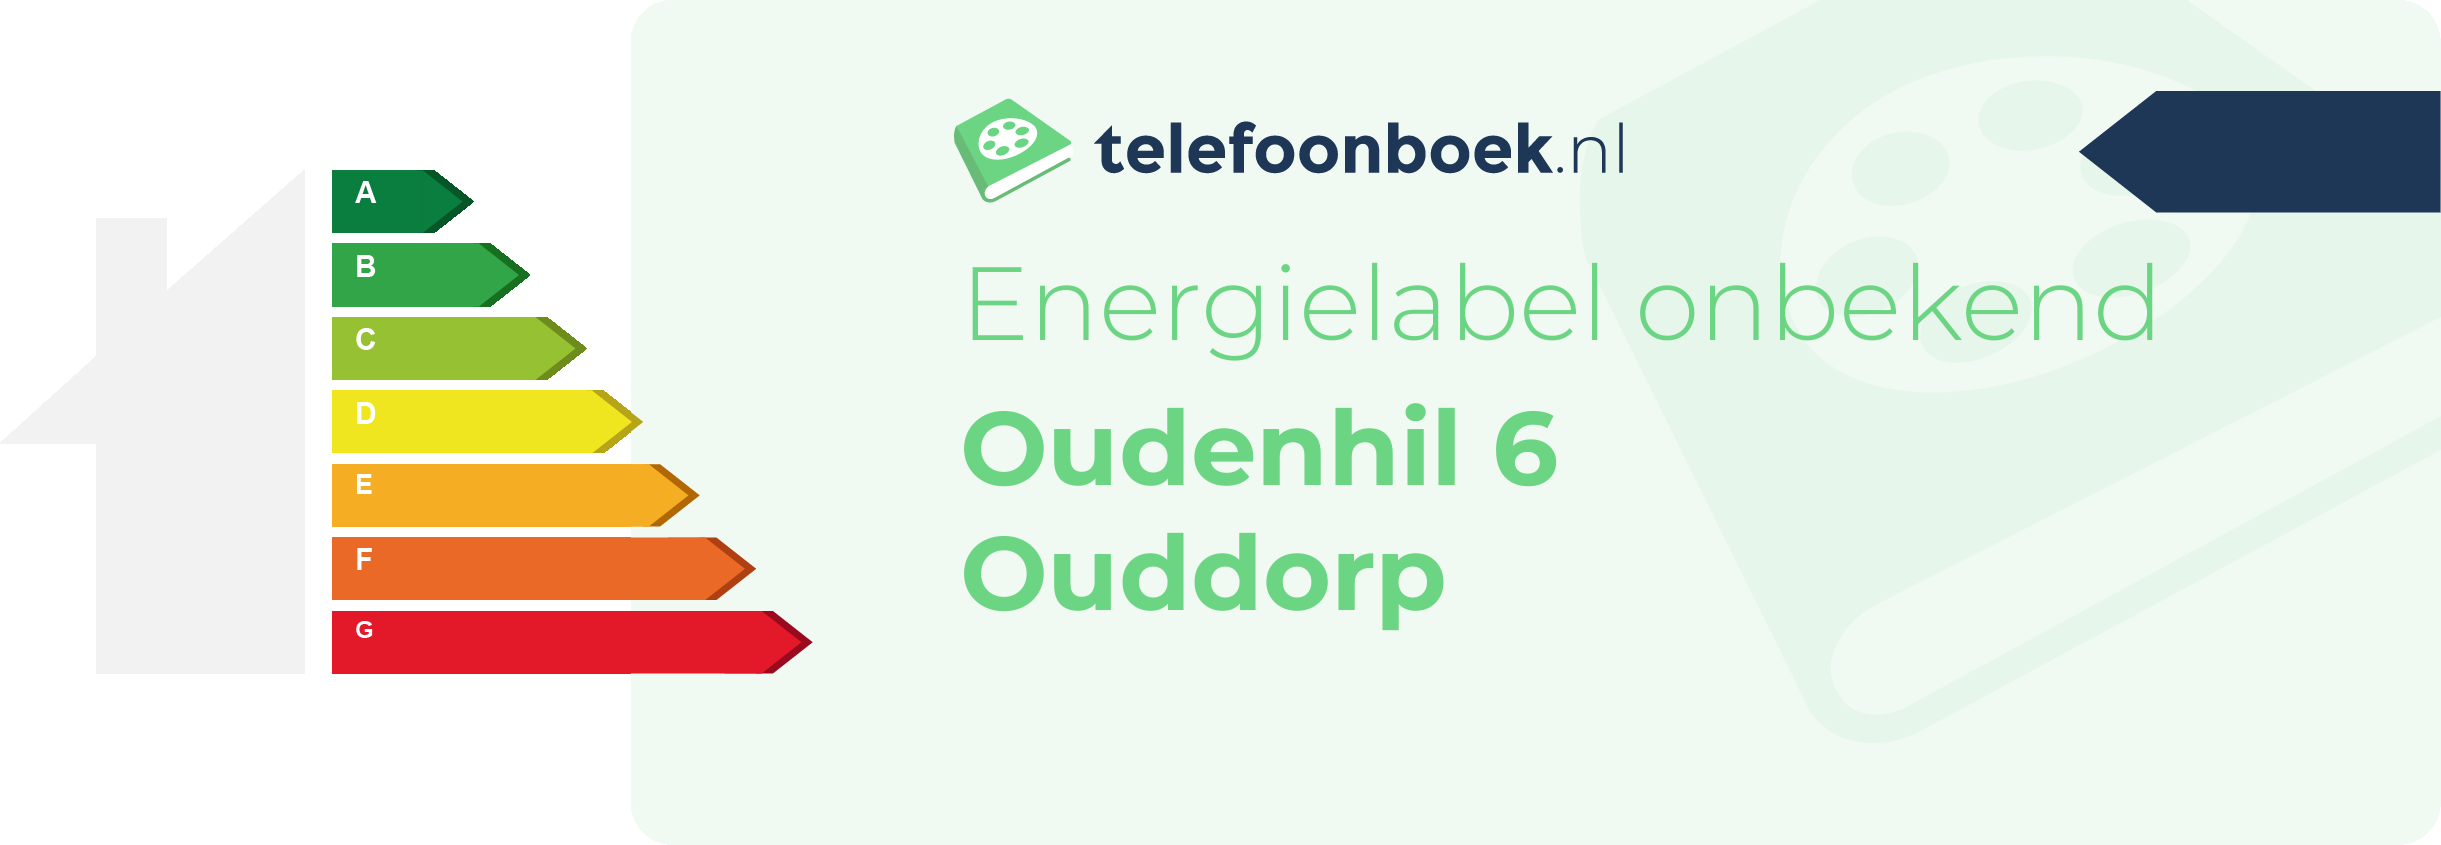 Energielabel Oudenhil 6 Ouddorp